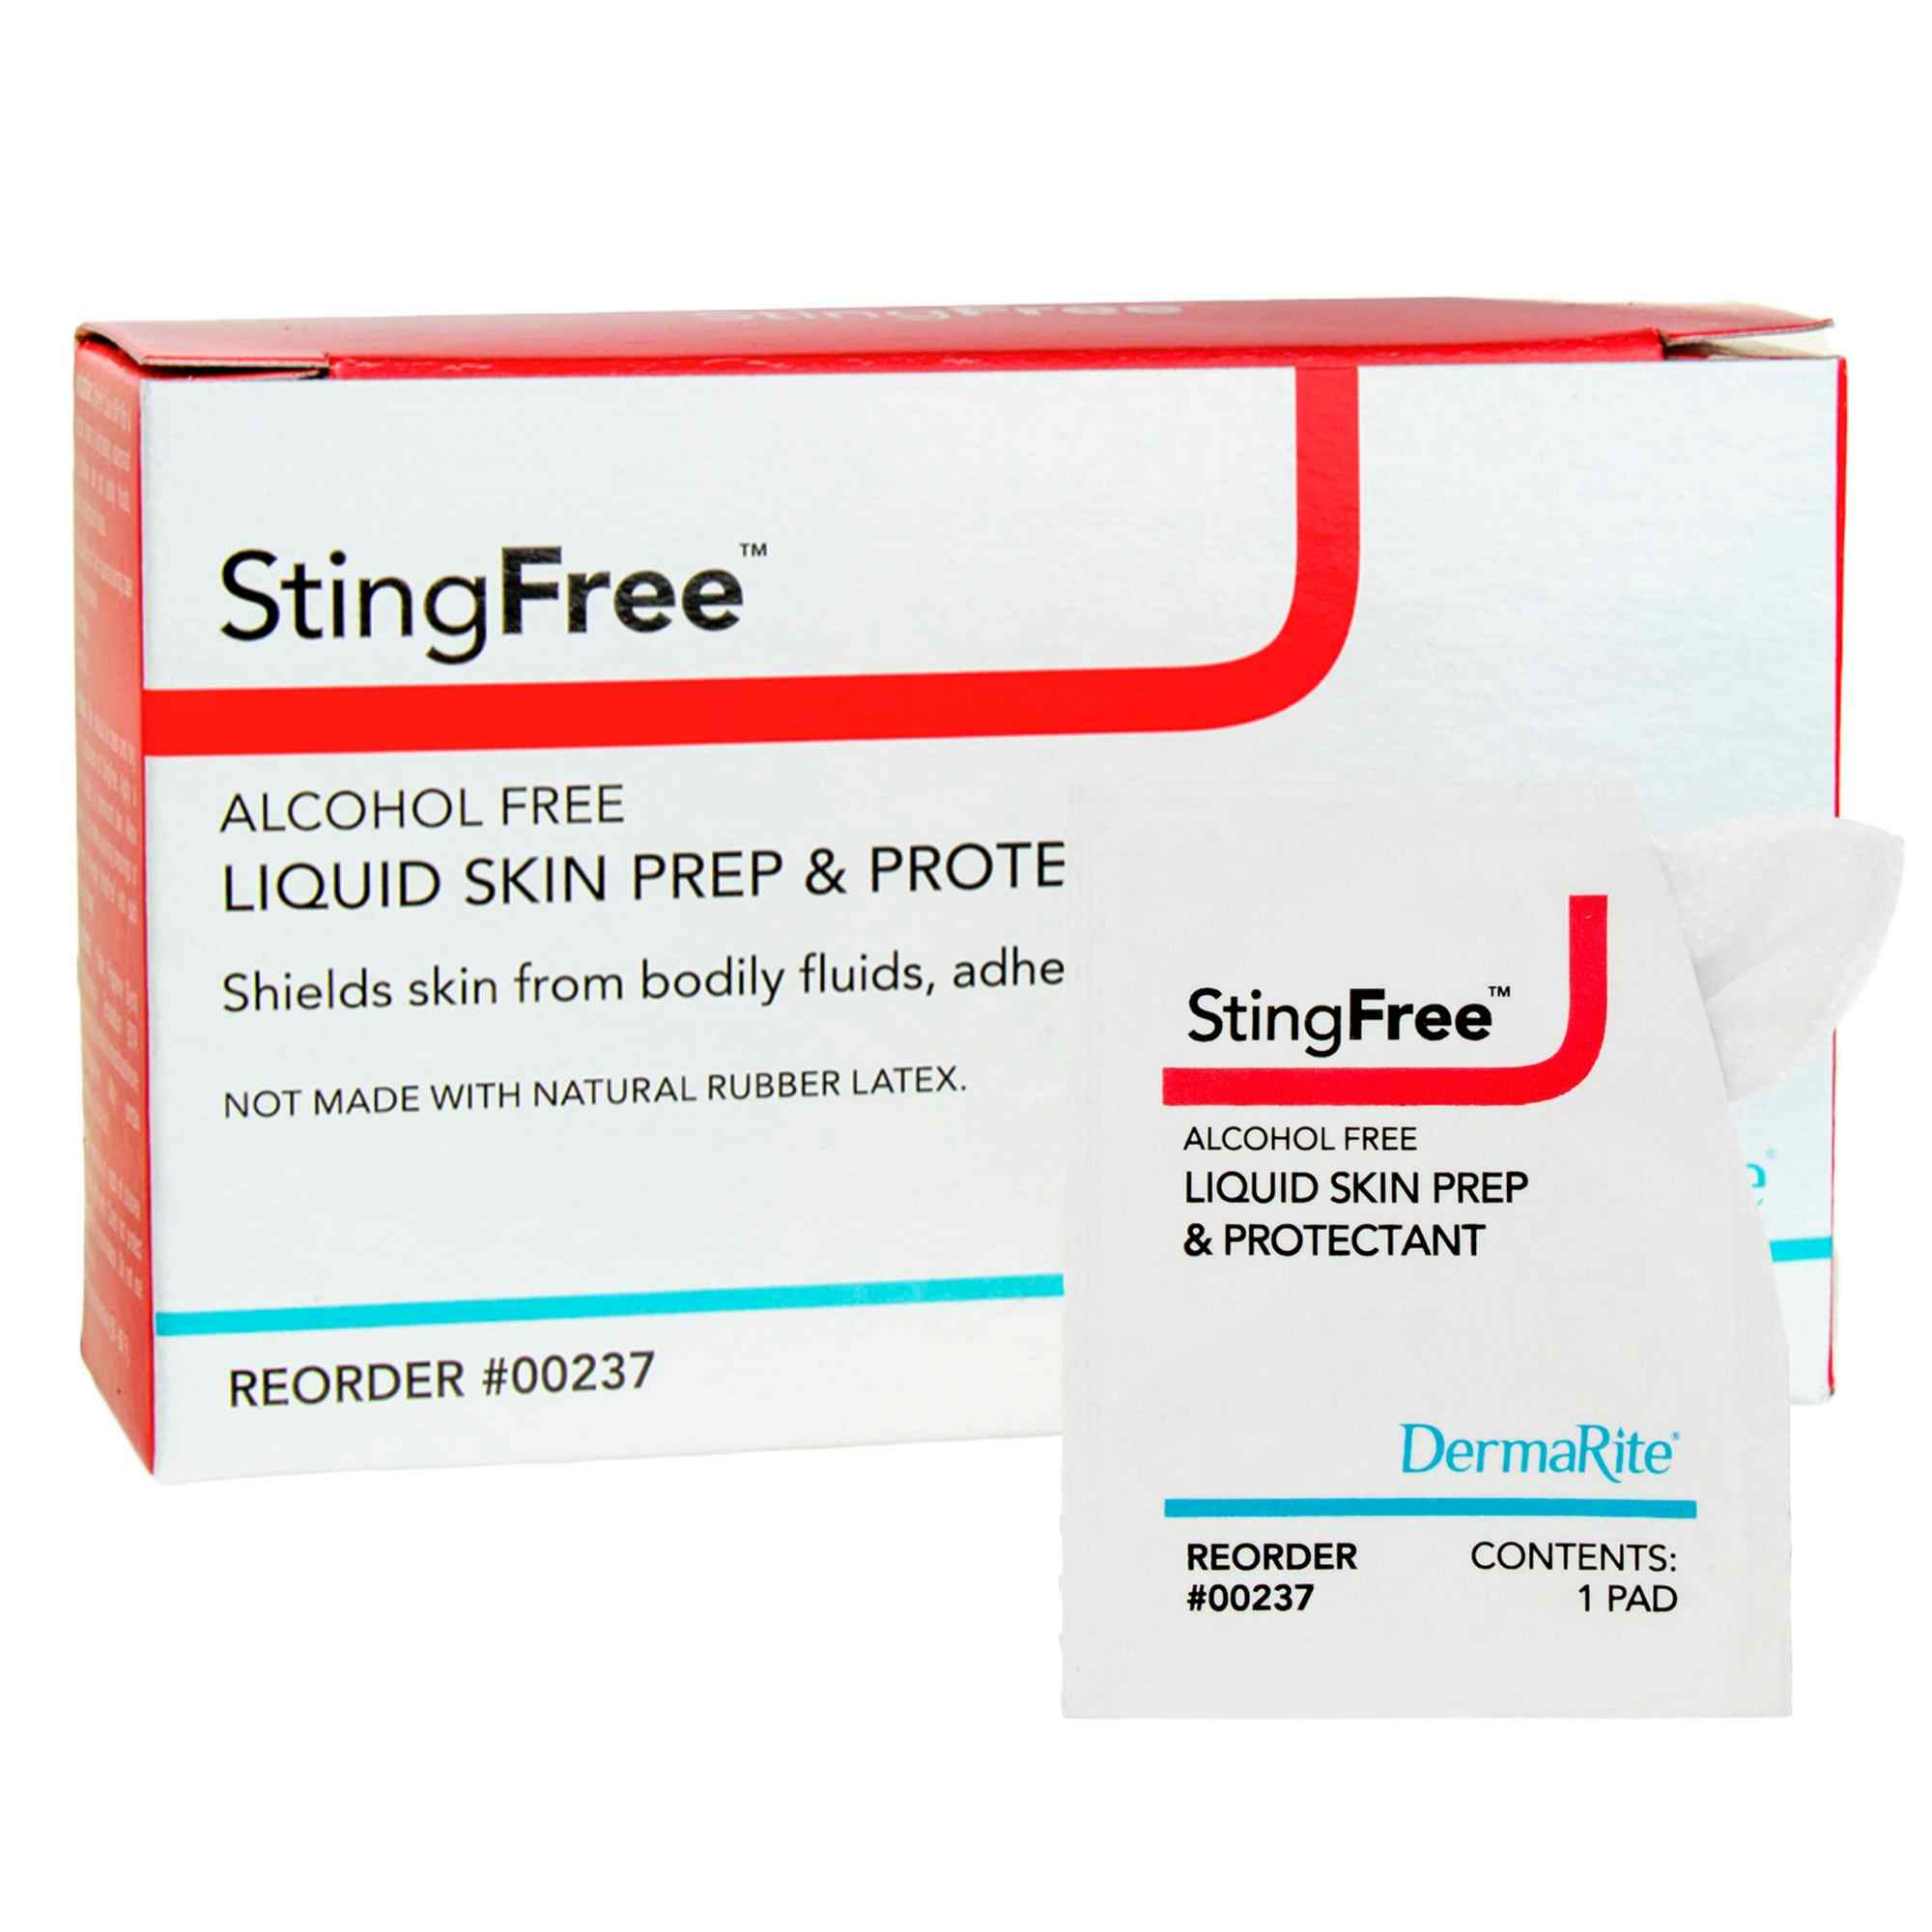 Sting Free AlcoholFree Liquid Skin Prep & Pote Packets, 237, Case of 500 (10 Boxes)